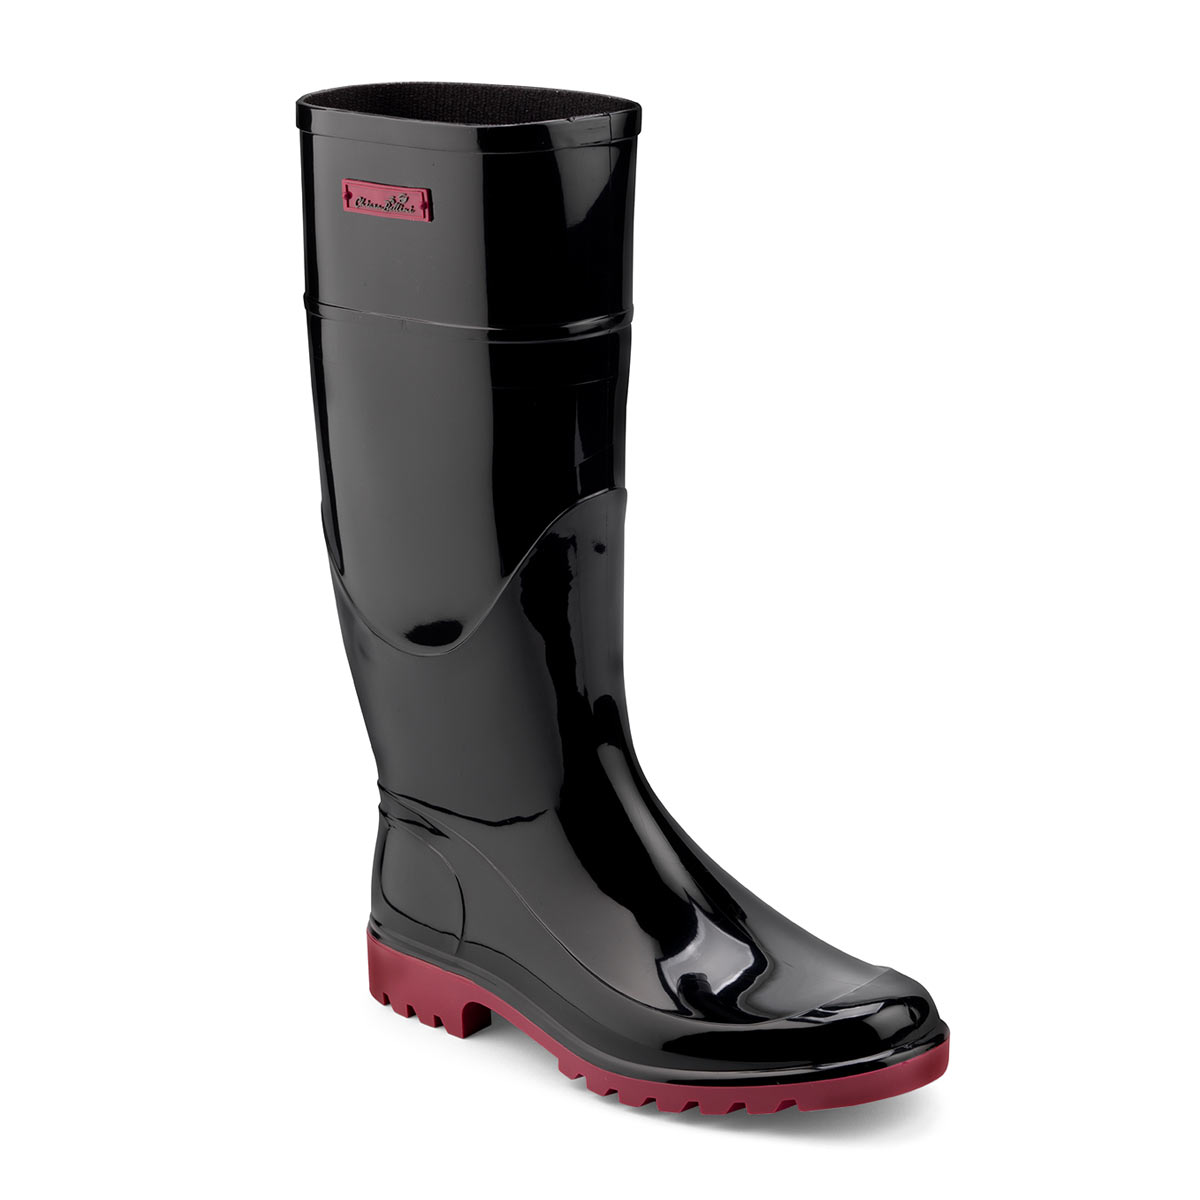 Bright pvc Rainboot with coloured label and sole